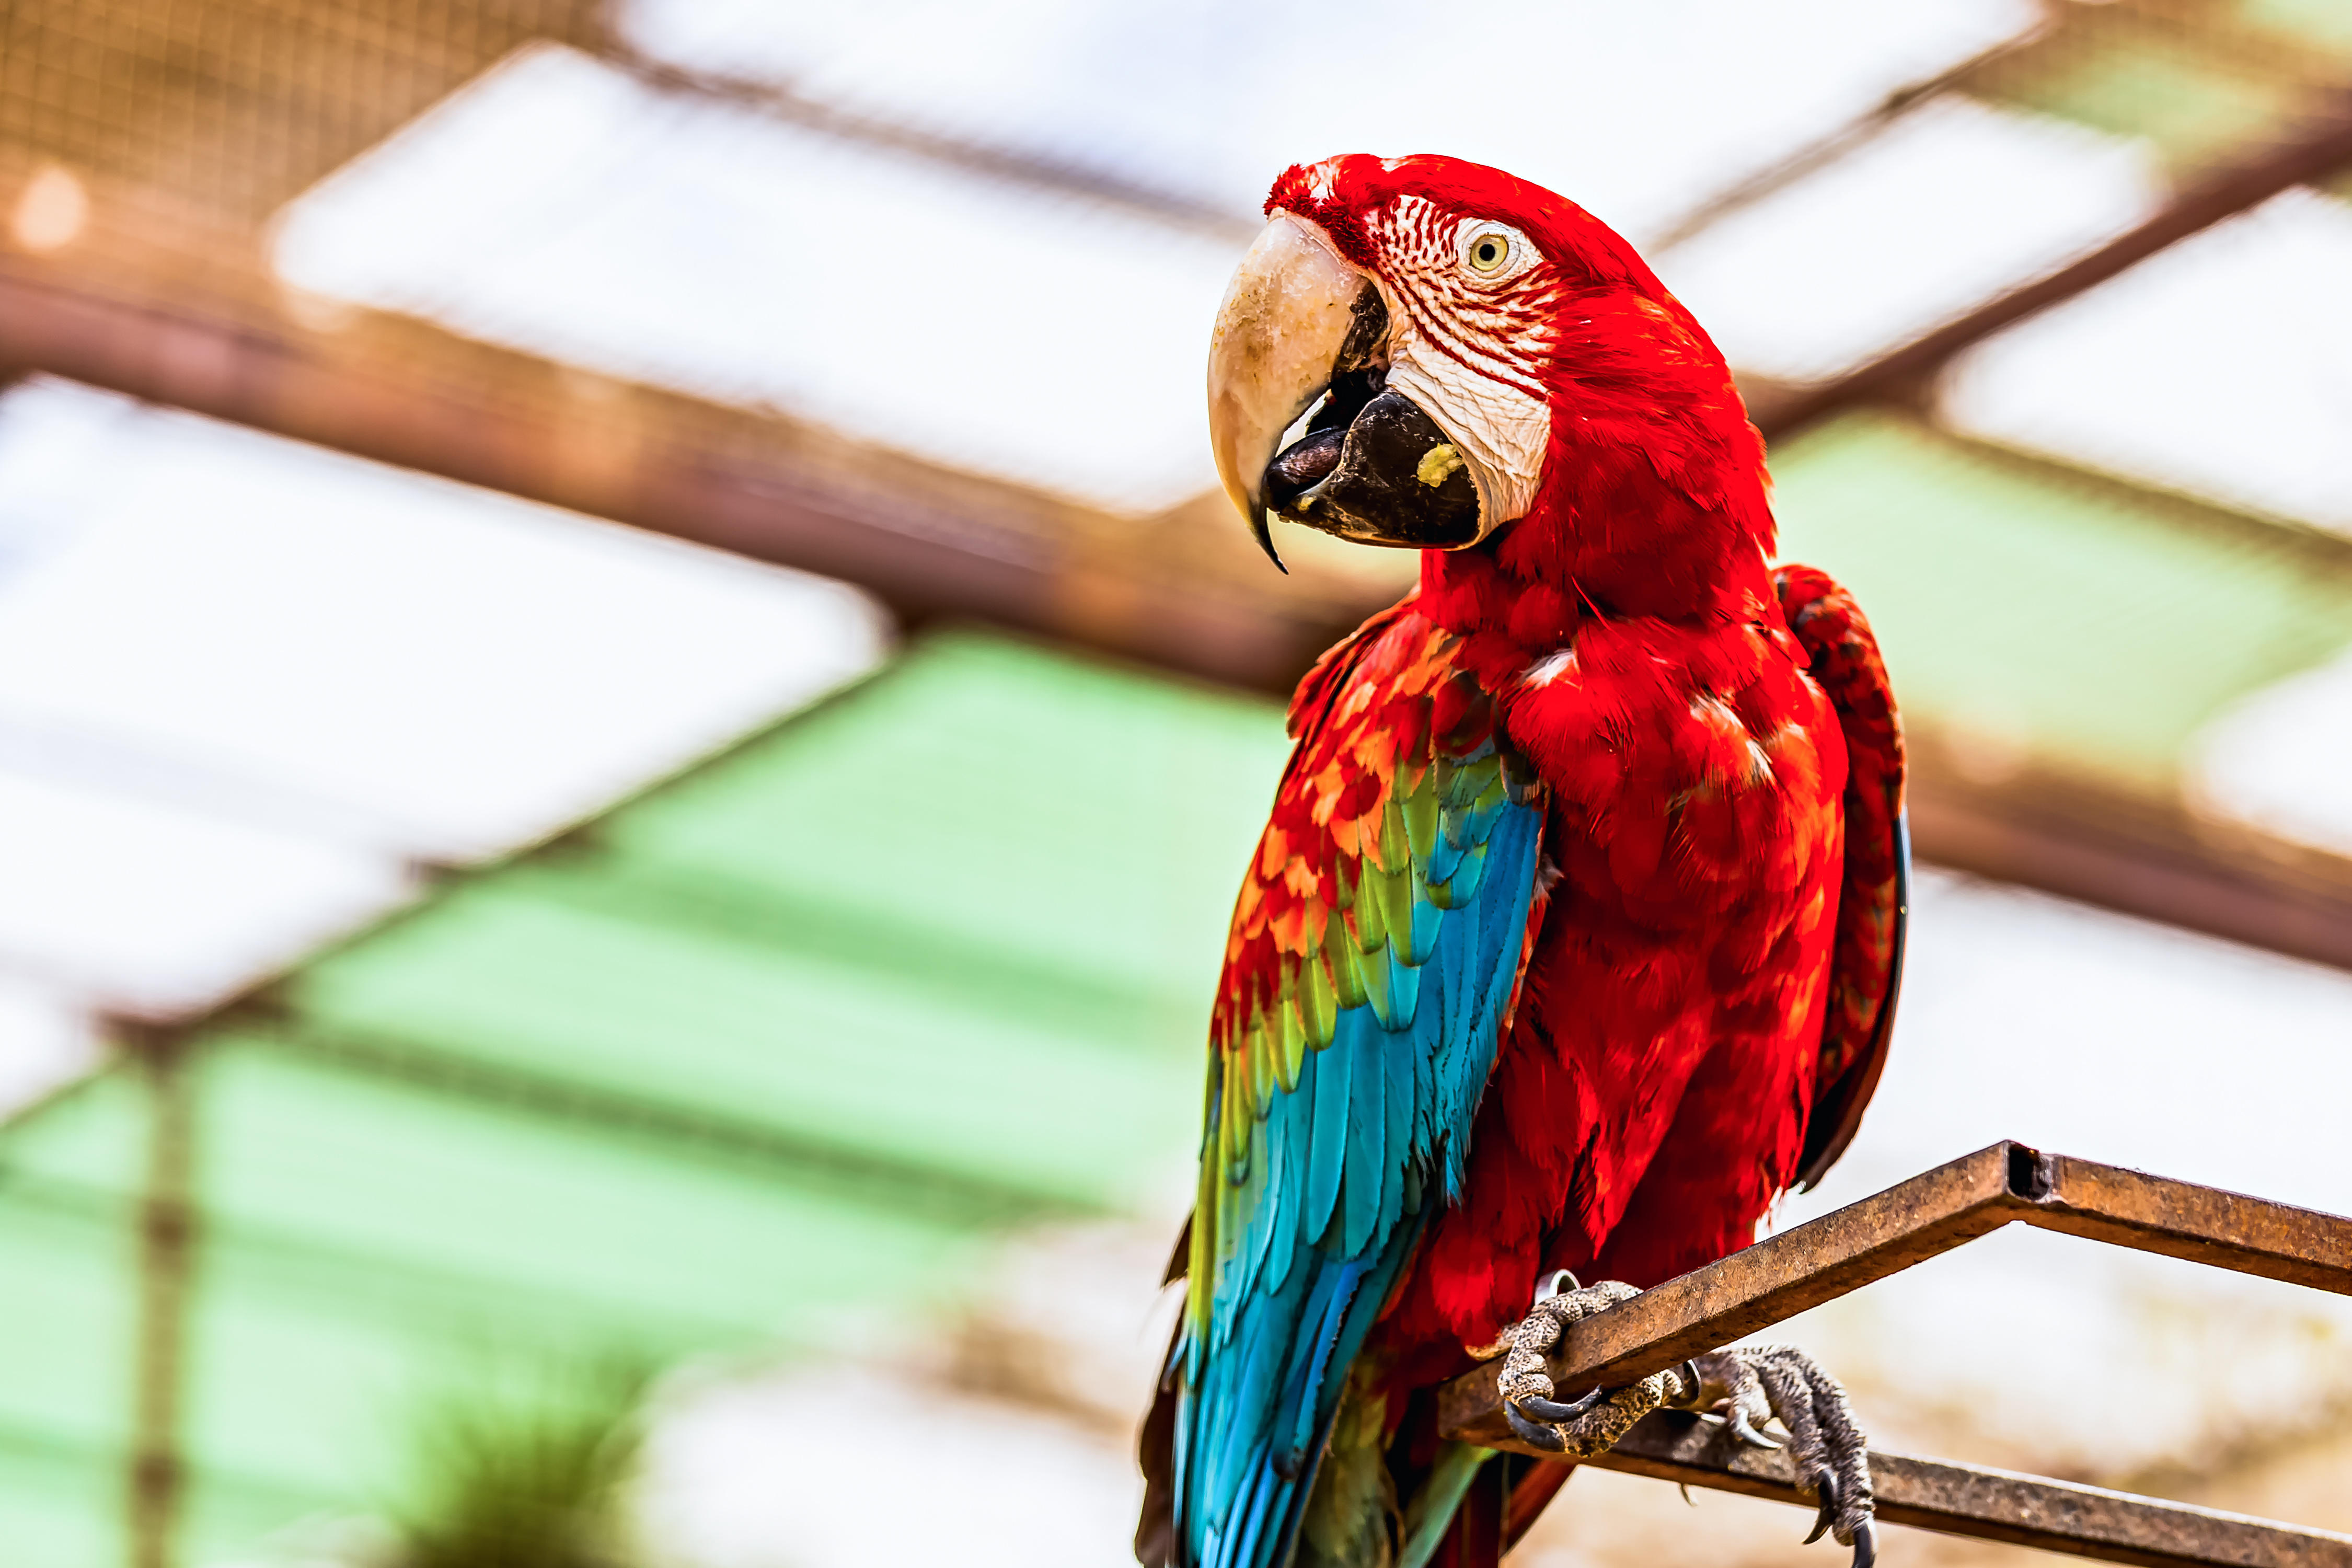 From Dark Reading – Millions at Risk As ‘Parrot’ Web Server Compromises Take Flight